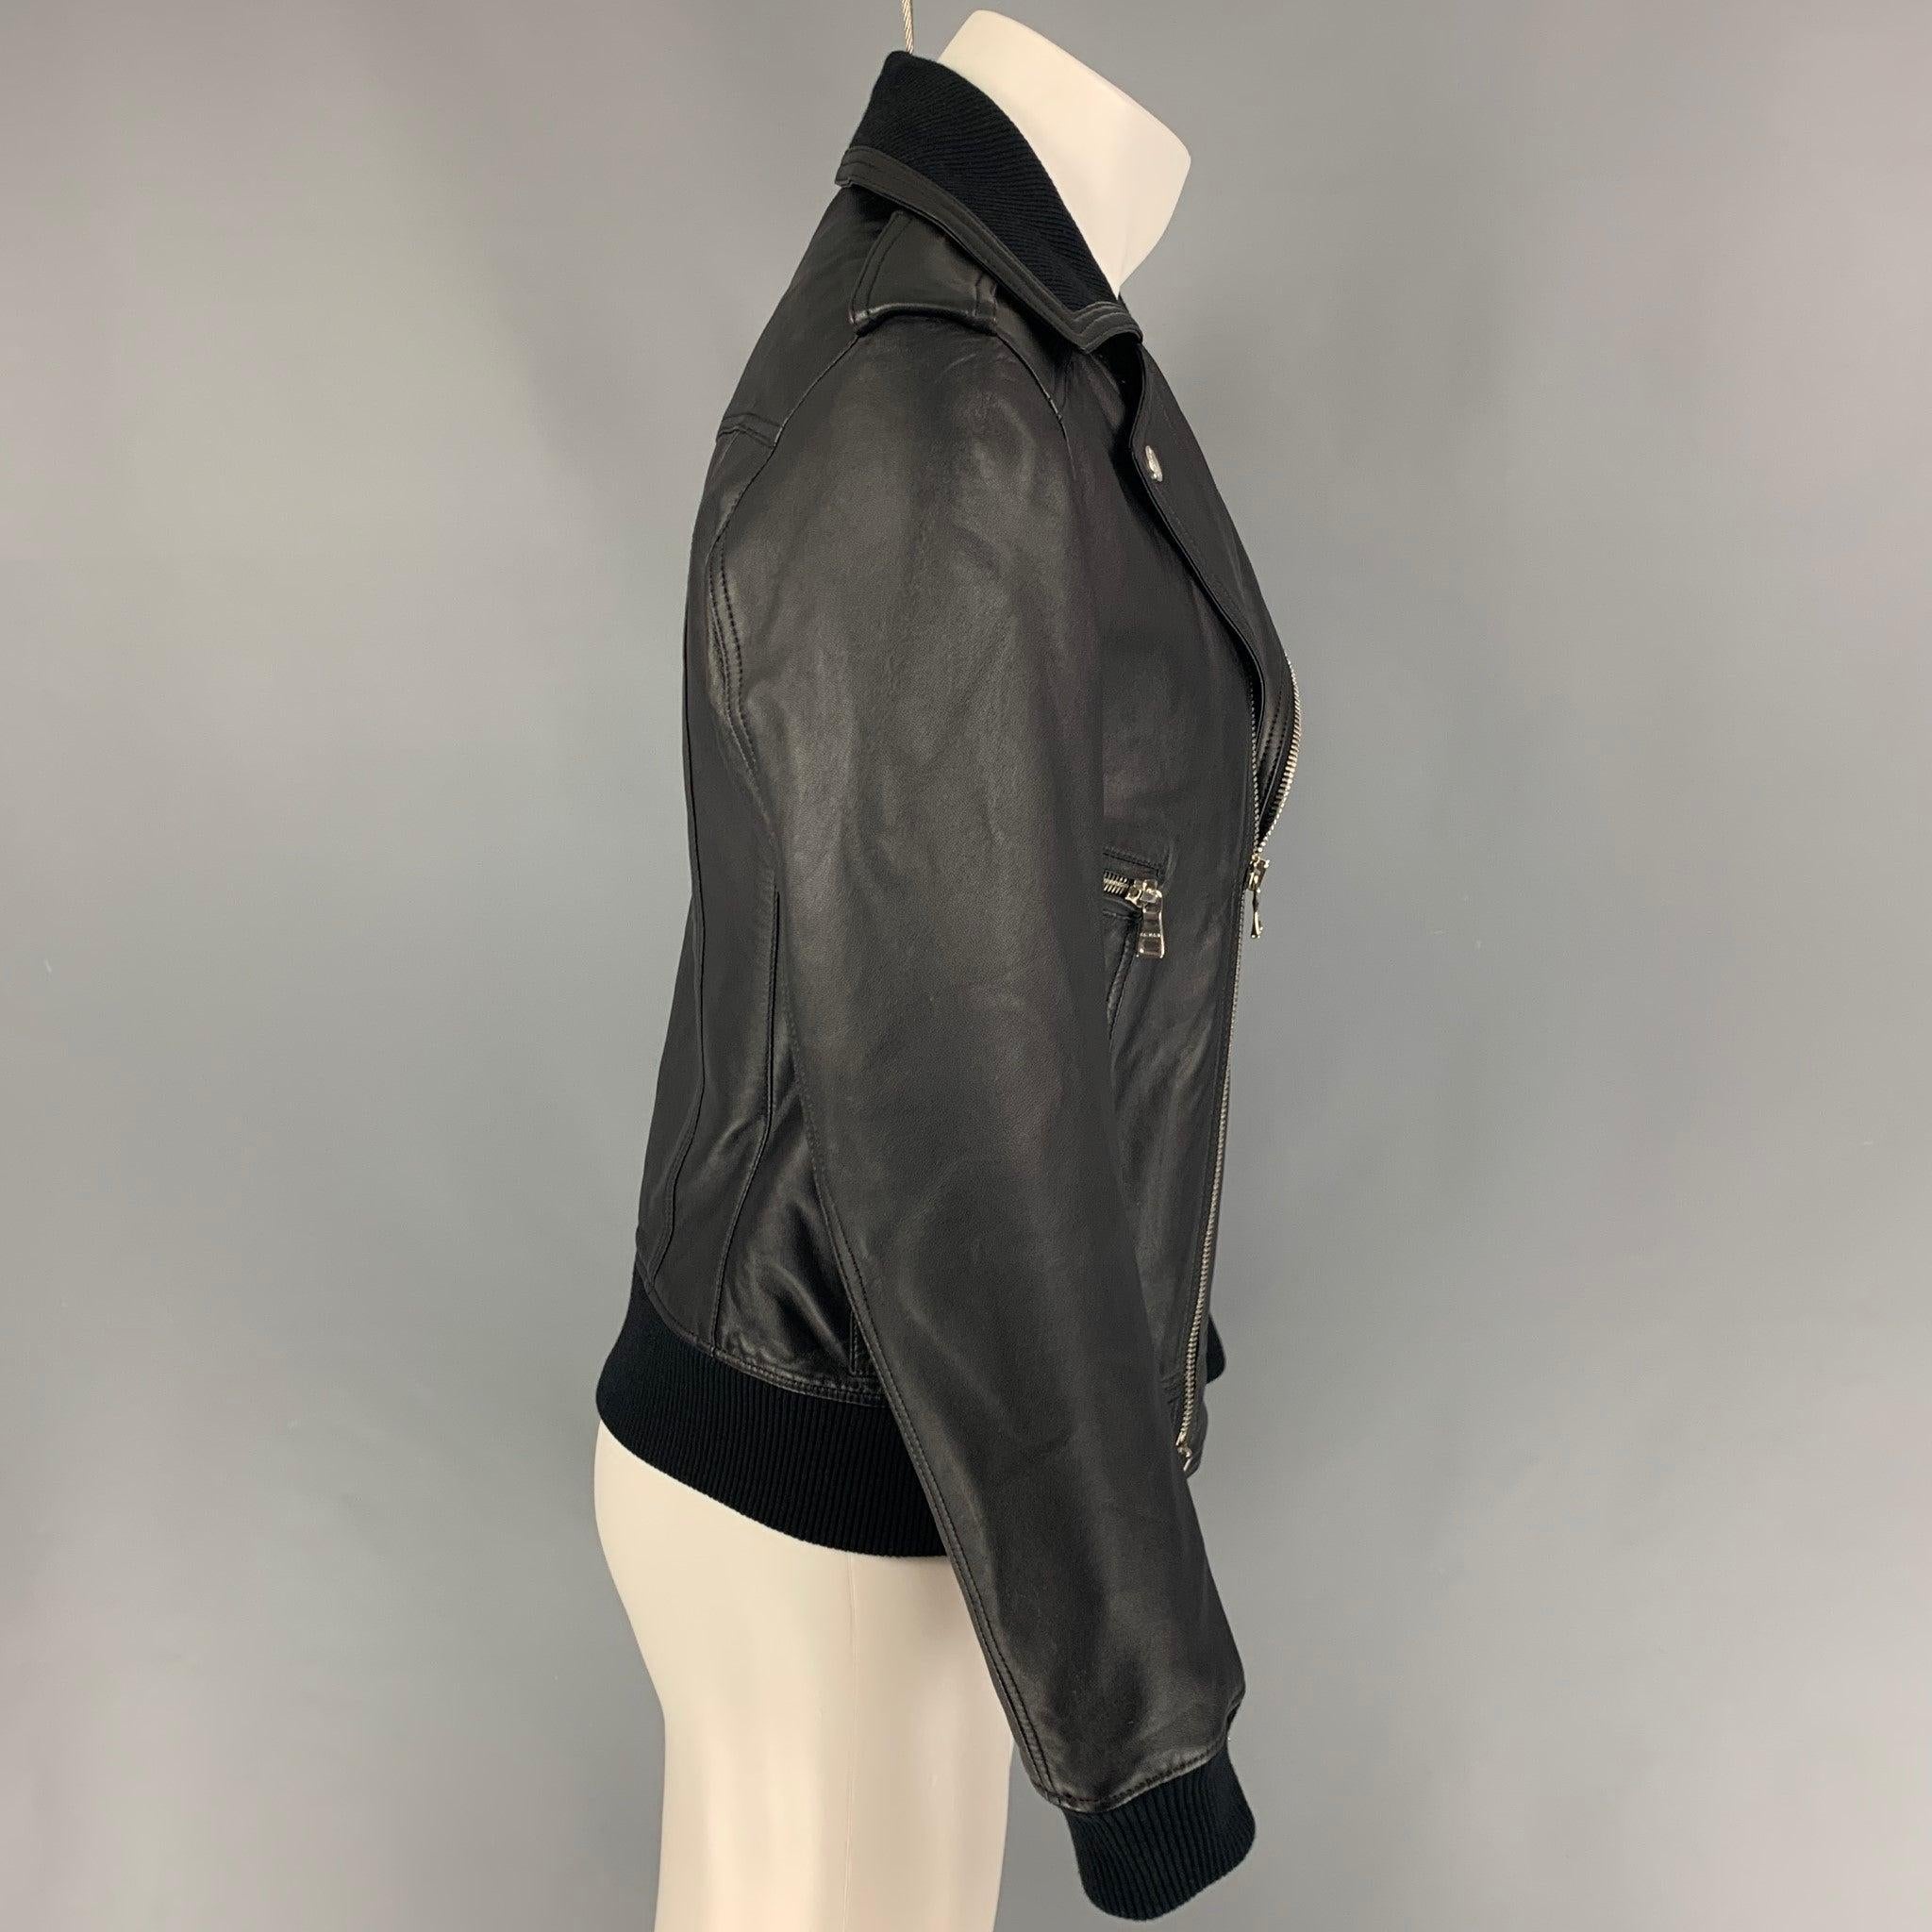 BALMAIN by Olivier Rousteing jacket comes in a black leather featuring a motorcycle style, ribbed hem, silver tone hardware, front pockets, epaulettes, and a full zip up closure.
Very Good
Pre-Owned Condition. 

Marked:   48 

Measurements: 
